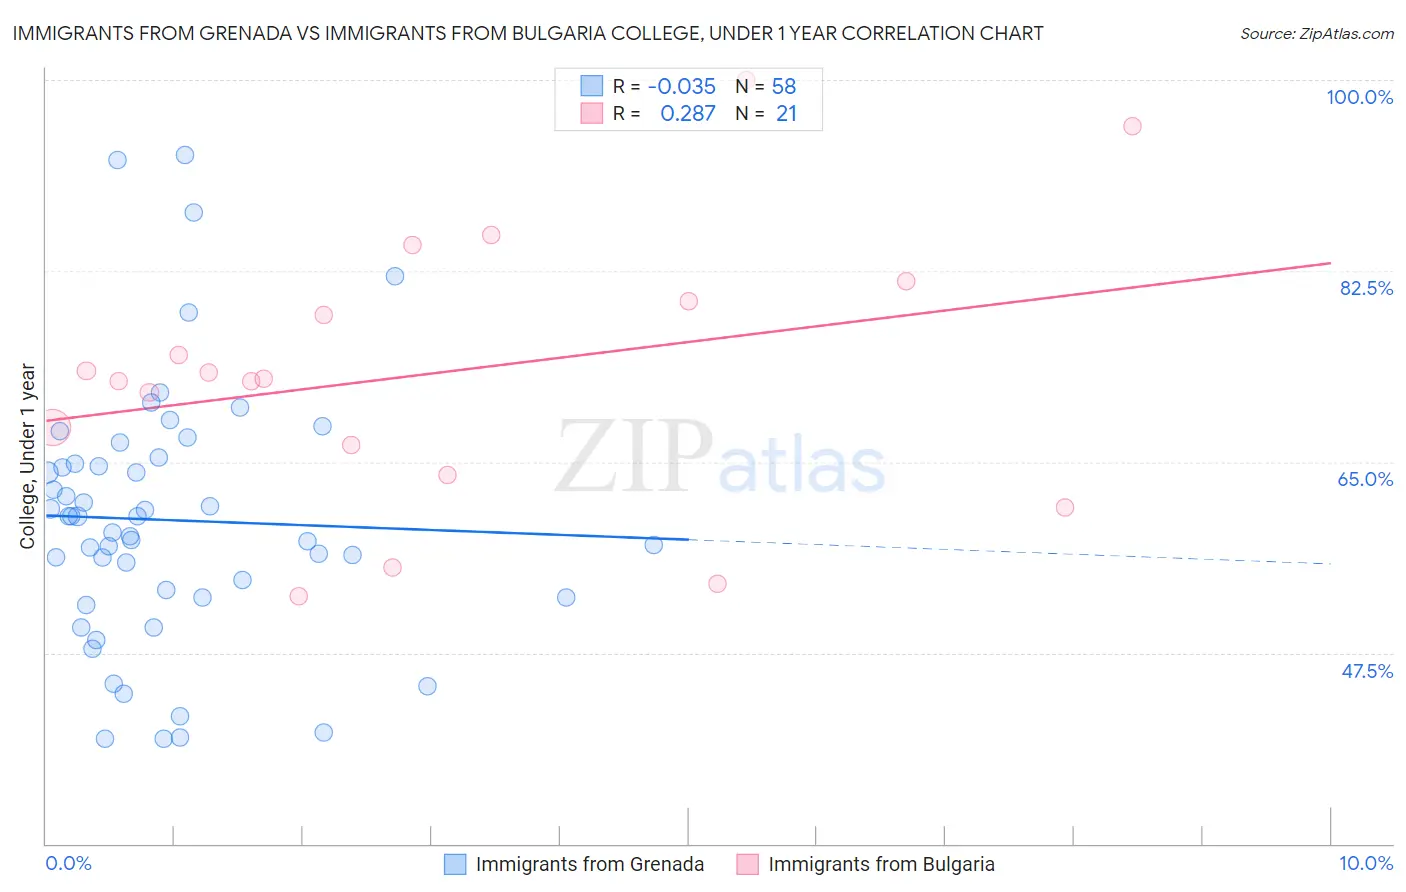 Immigrants from Grenada vs Immigrants from Bulgaria College, Under 1 year